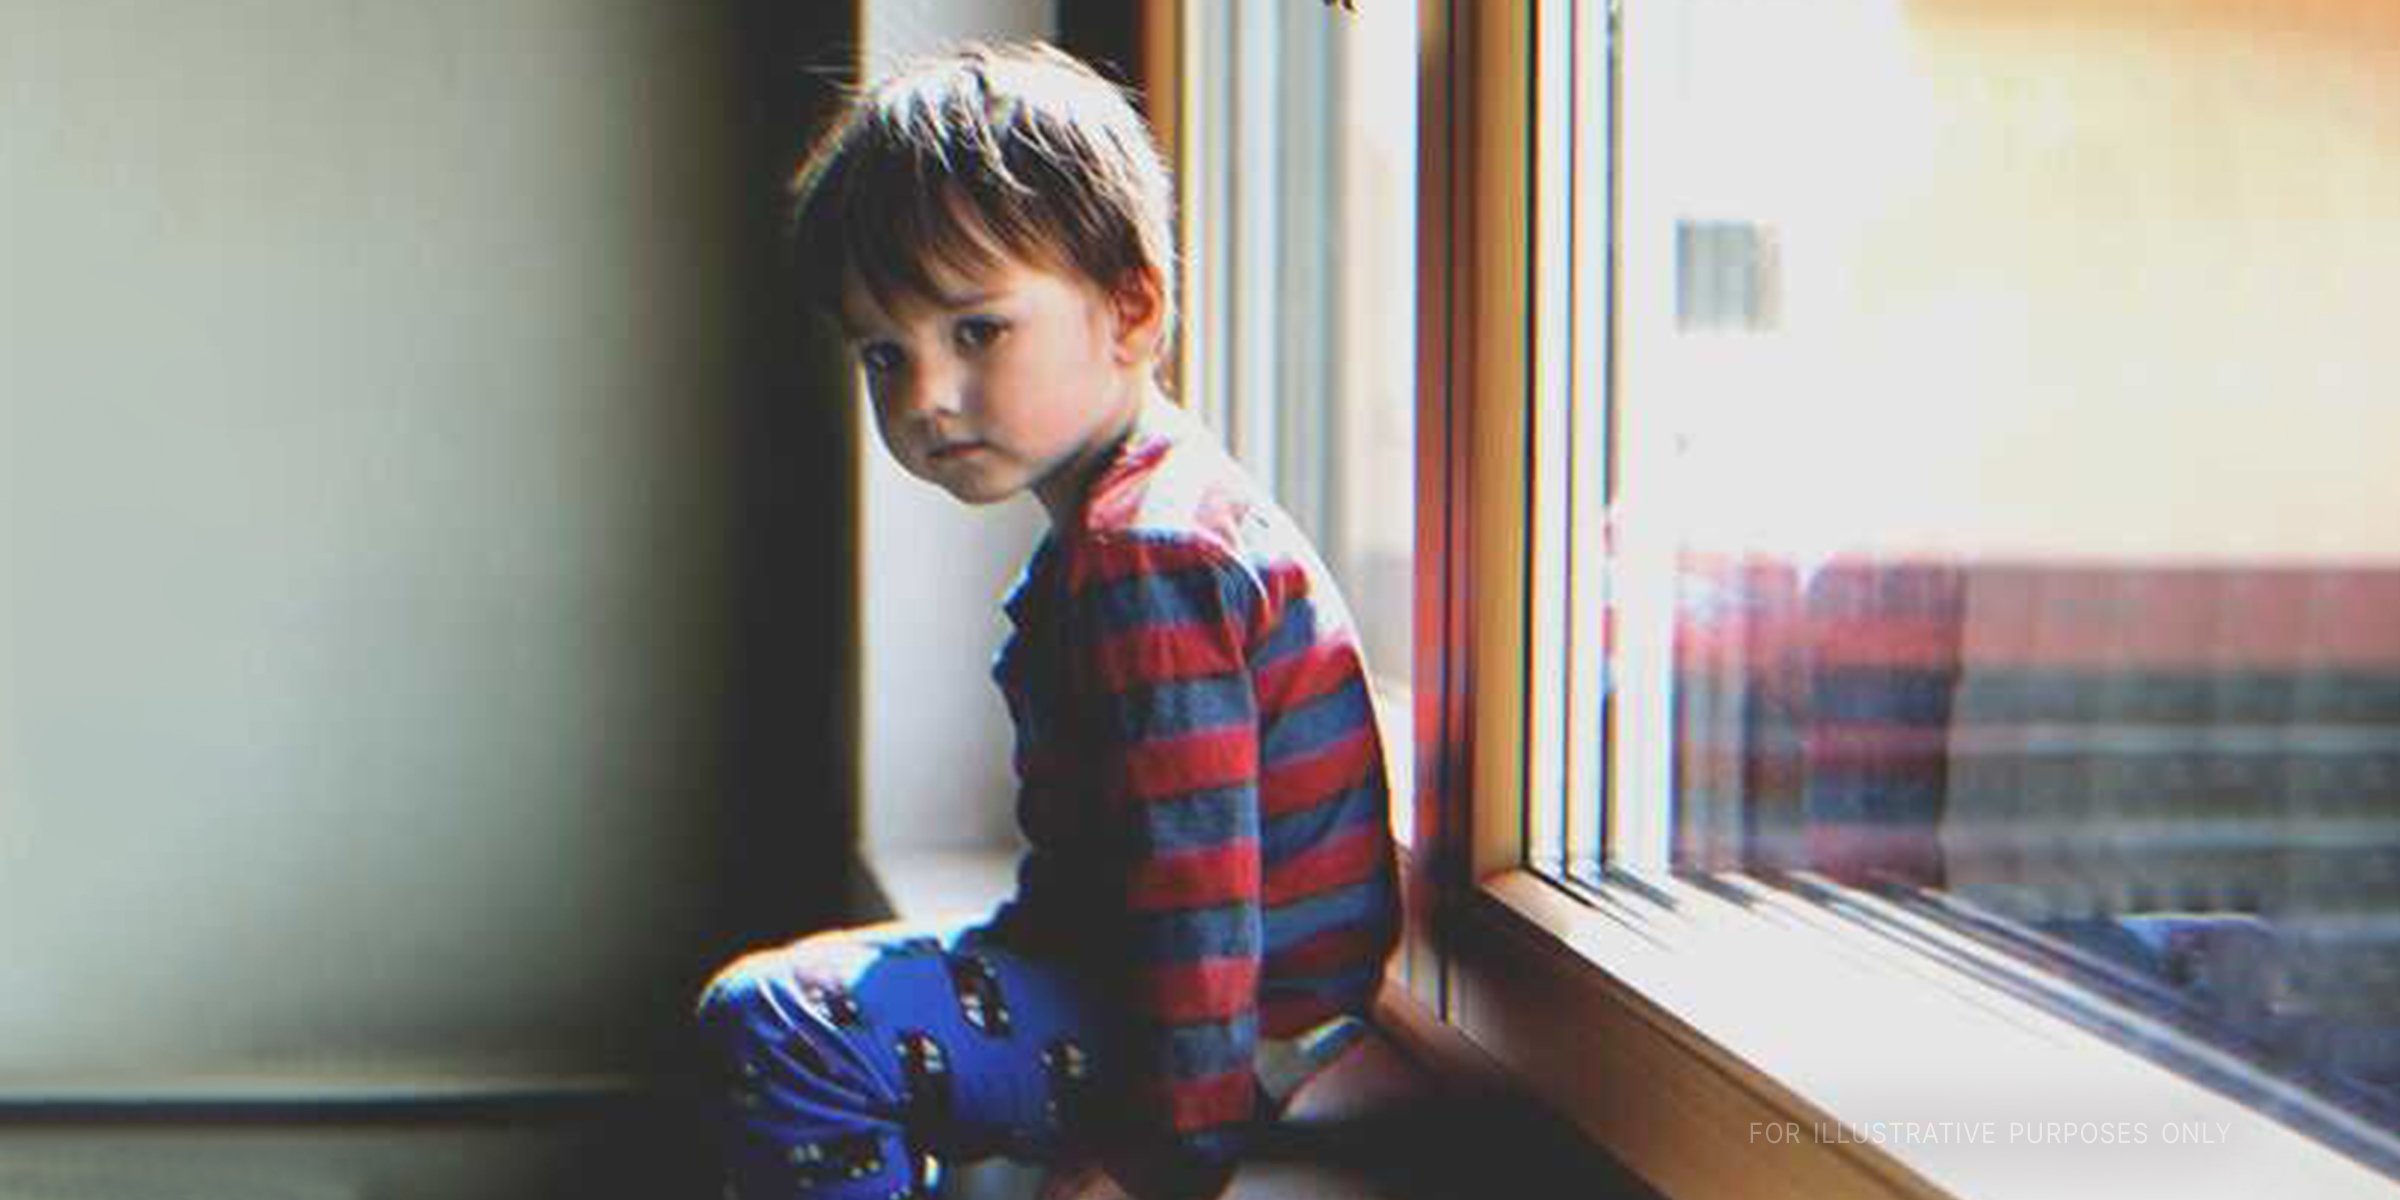 Boy lost in thought | Source: Shutterstock